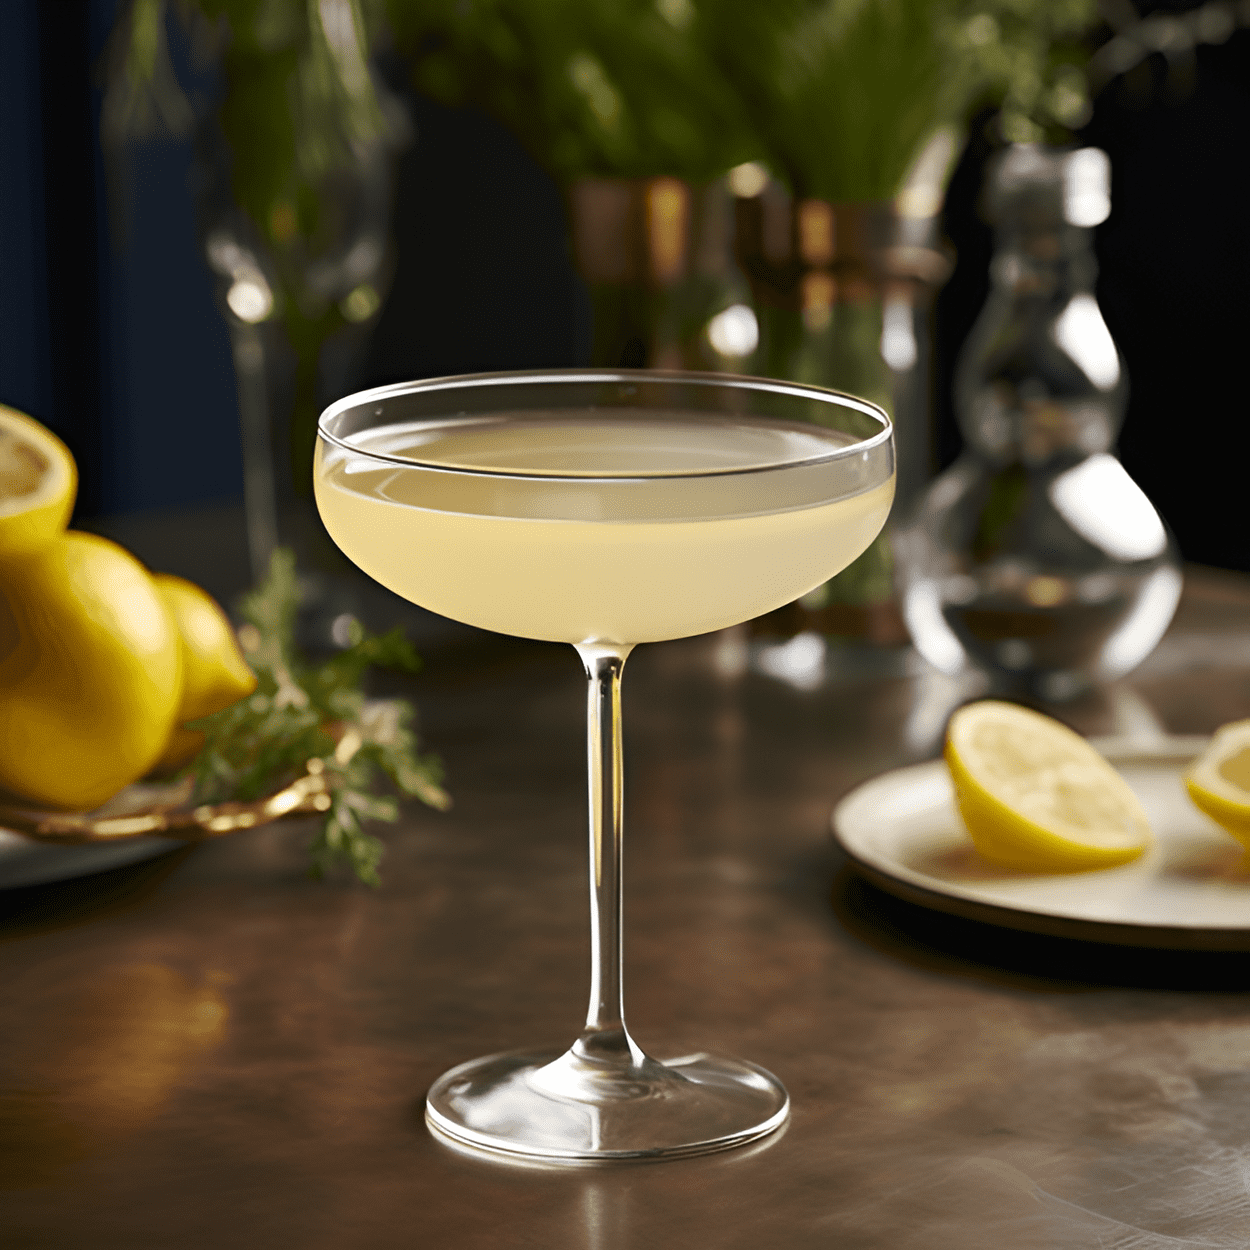 Clarified Milk Punch Cocktail Recipe - The Clarified Milk Punch is a harmonious blend of sweet, sour, and strong flavors. It has a creamy, velvety texture with a hint of citrus and a strong punch of rum. The taste is complex yet balanced, with a long, satisfying finish.